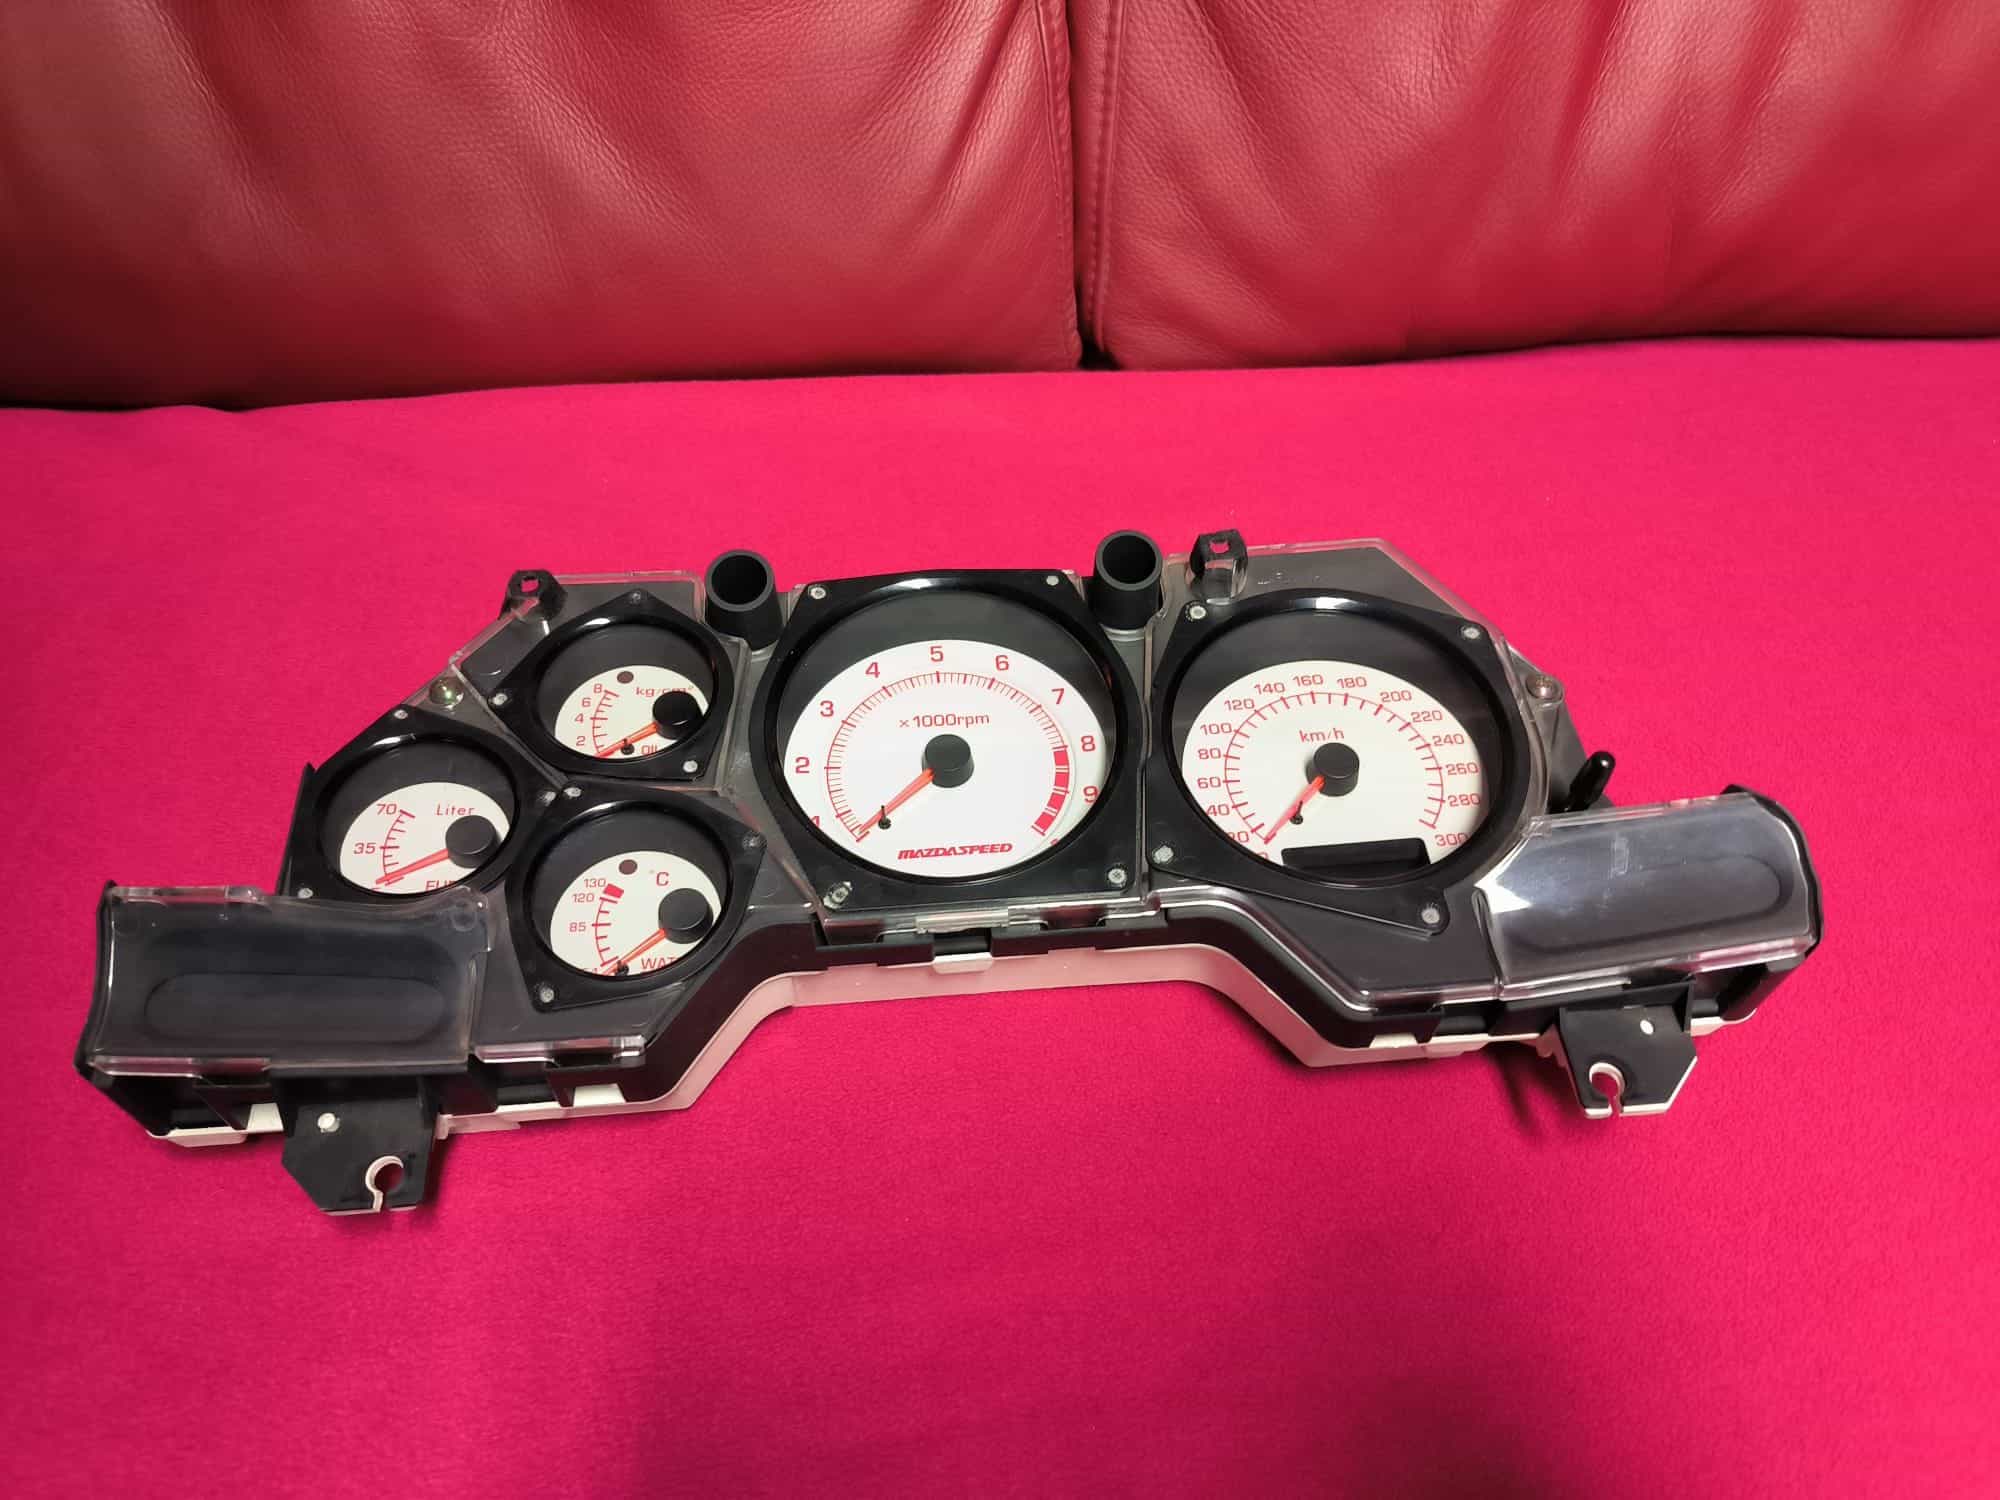 Interior/Upholstery - Mazdaspeed A-Spec White Faced Instrument Cluster - Used - 1992 to 2002 Mazda RX-7 - Birmingham DY29SA, United Kingdom